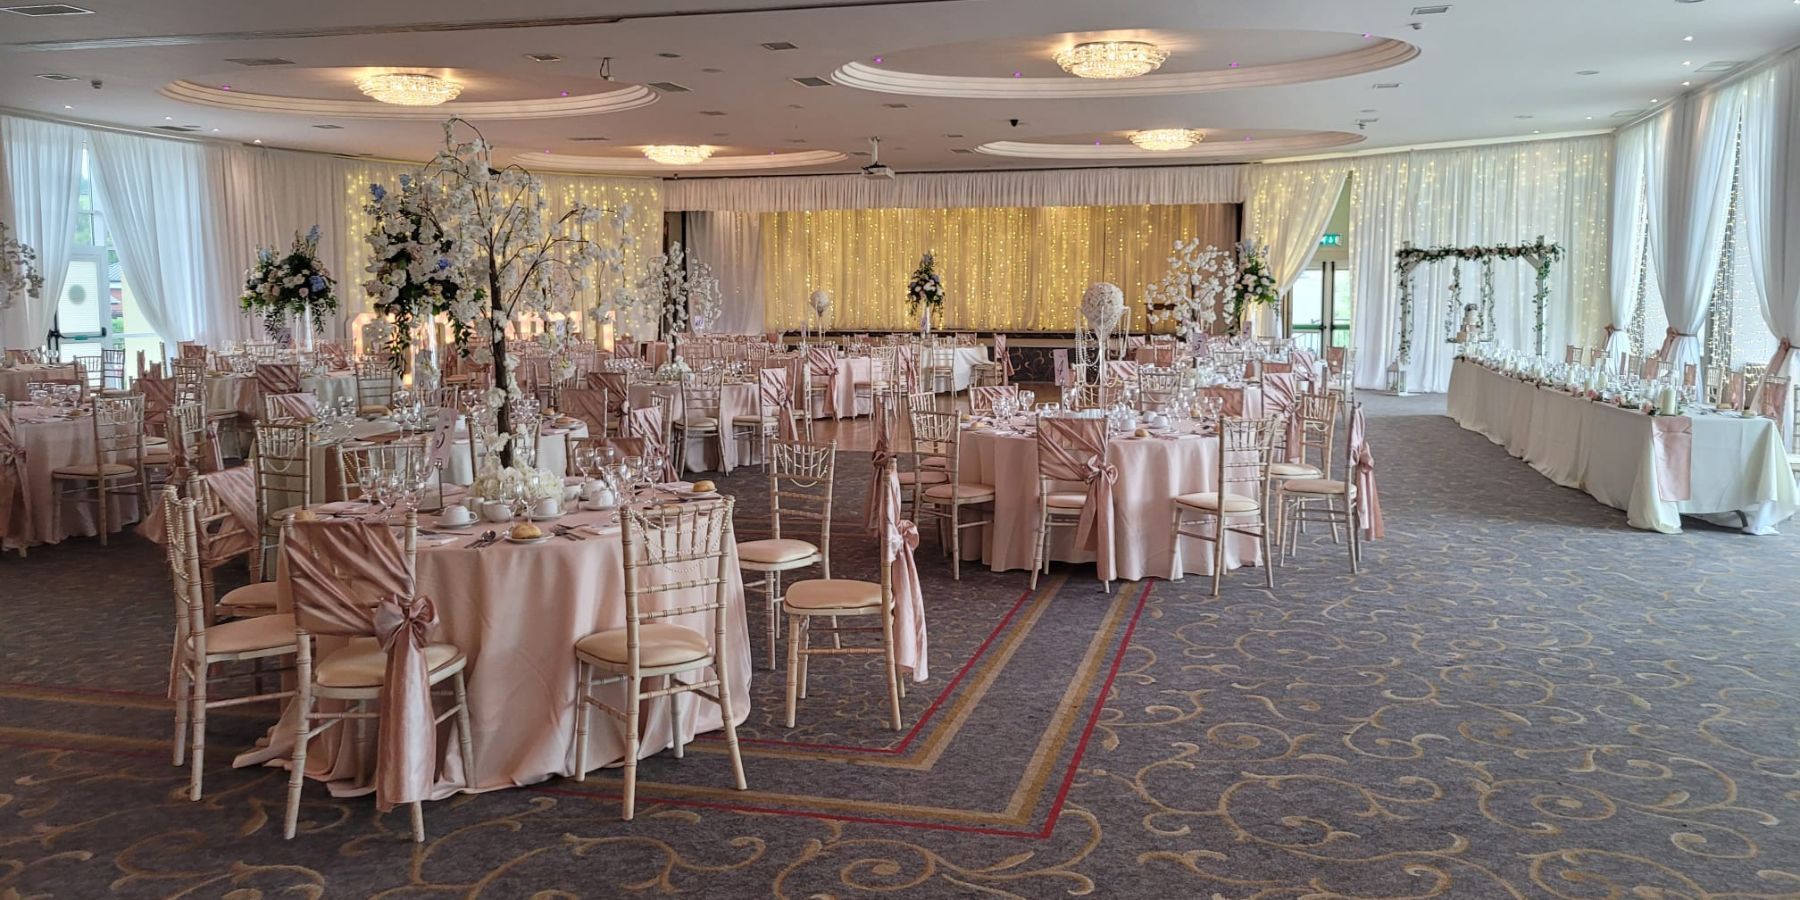 The stunning Lisfannon Ballroom for Peter and Rochelle's wedding on 9th July 2022. Chivari Chairs paired with elegant draping and romantic fairy lights, with colours of blush pink and cream throughout.